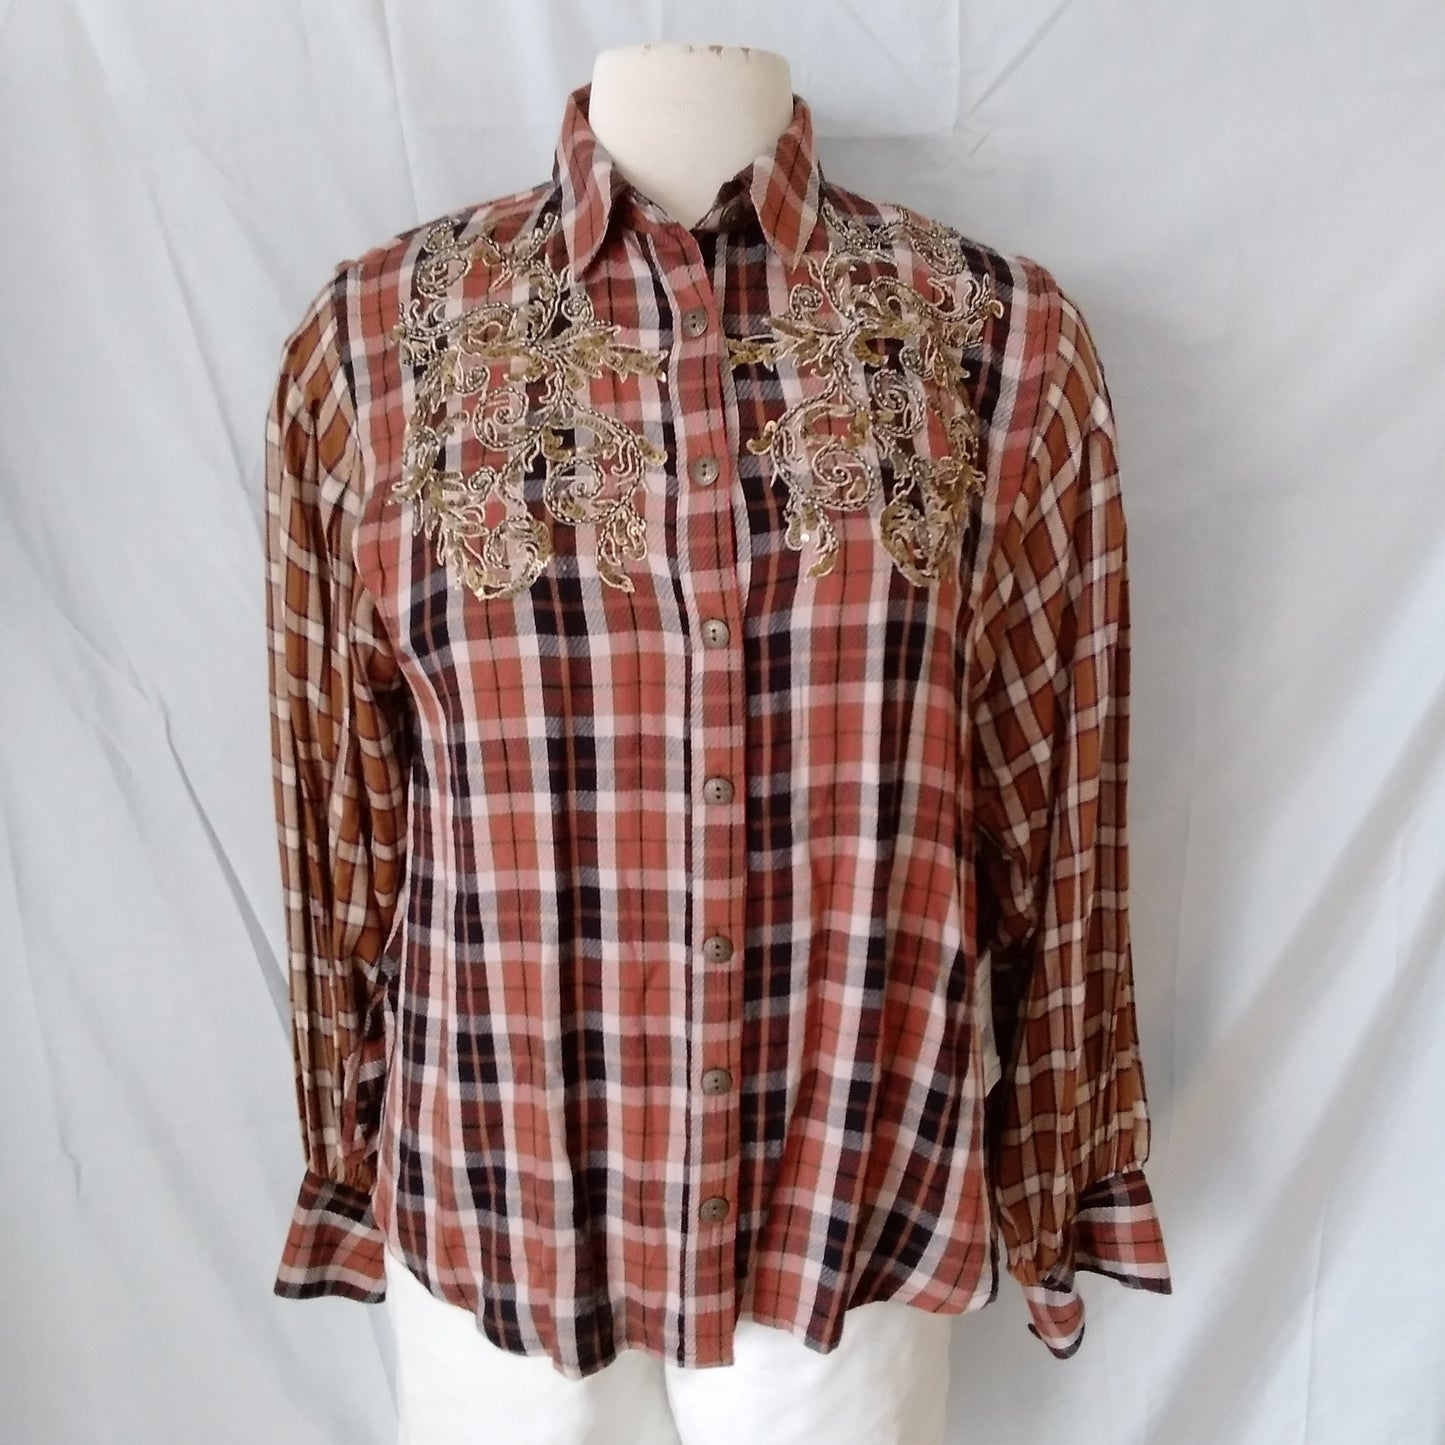 Free People - Women's Copper Plaid Shirt - Size S - NWT